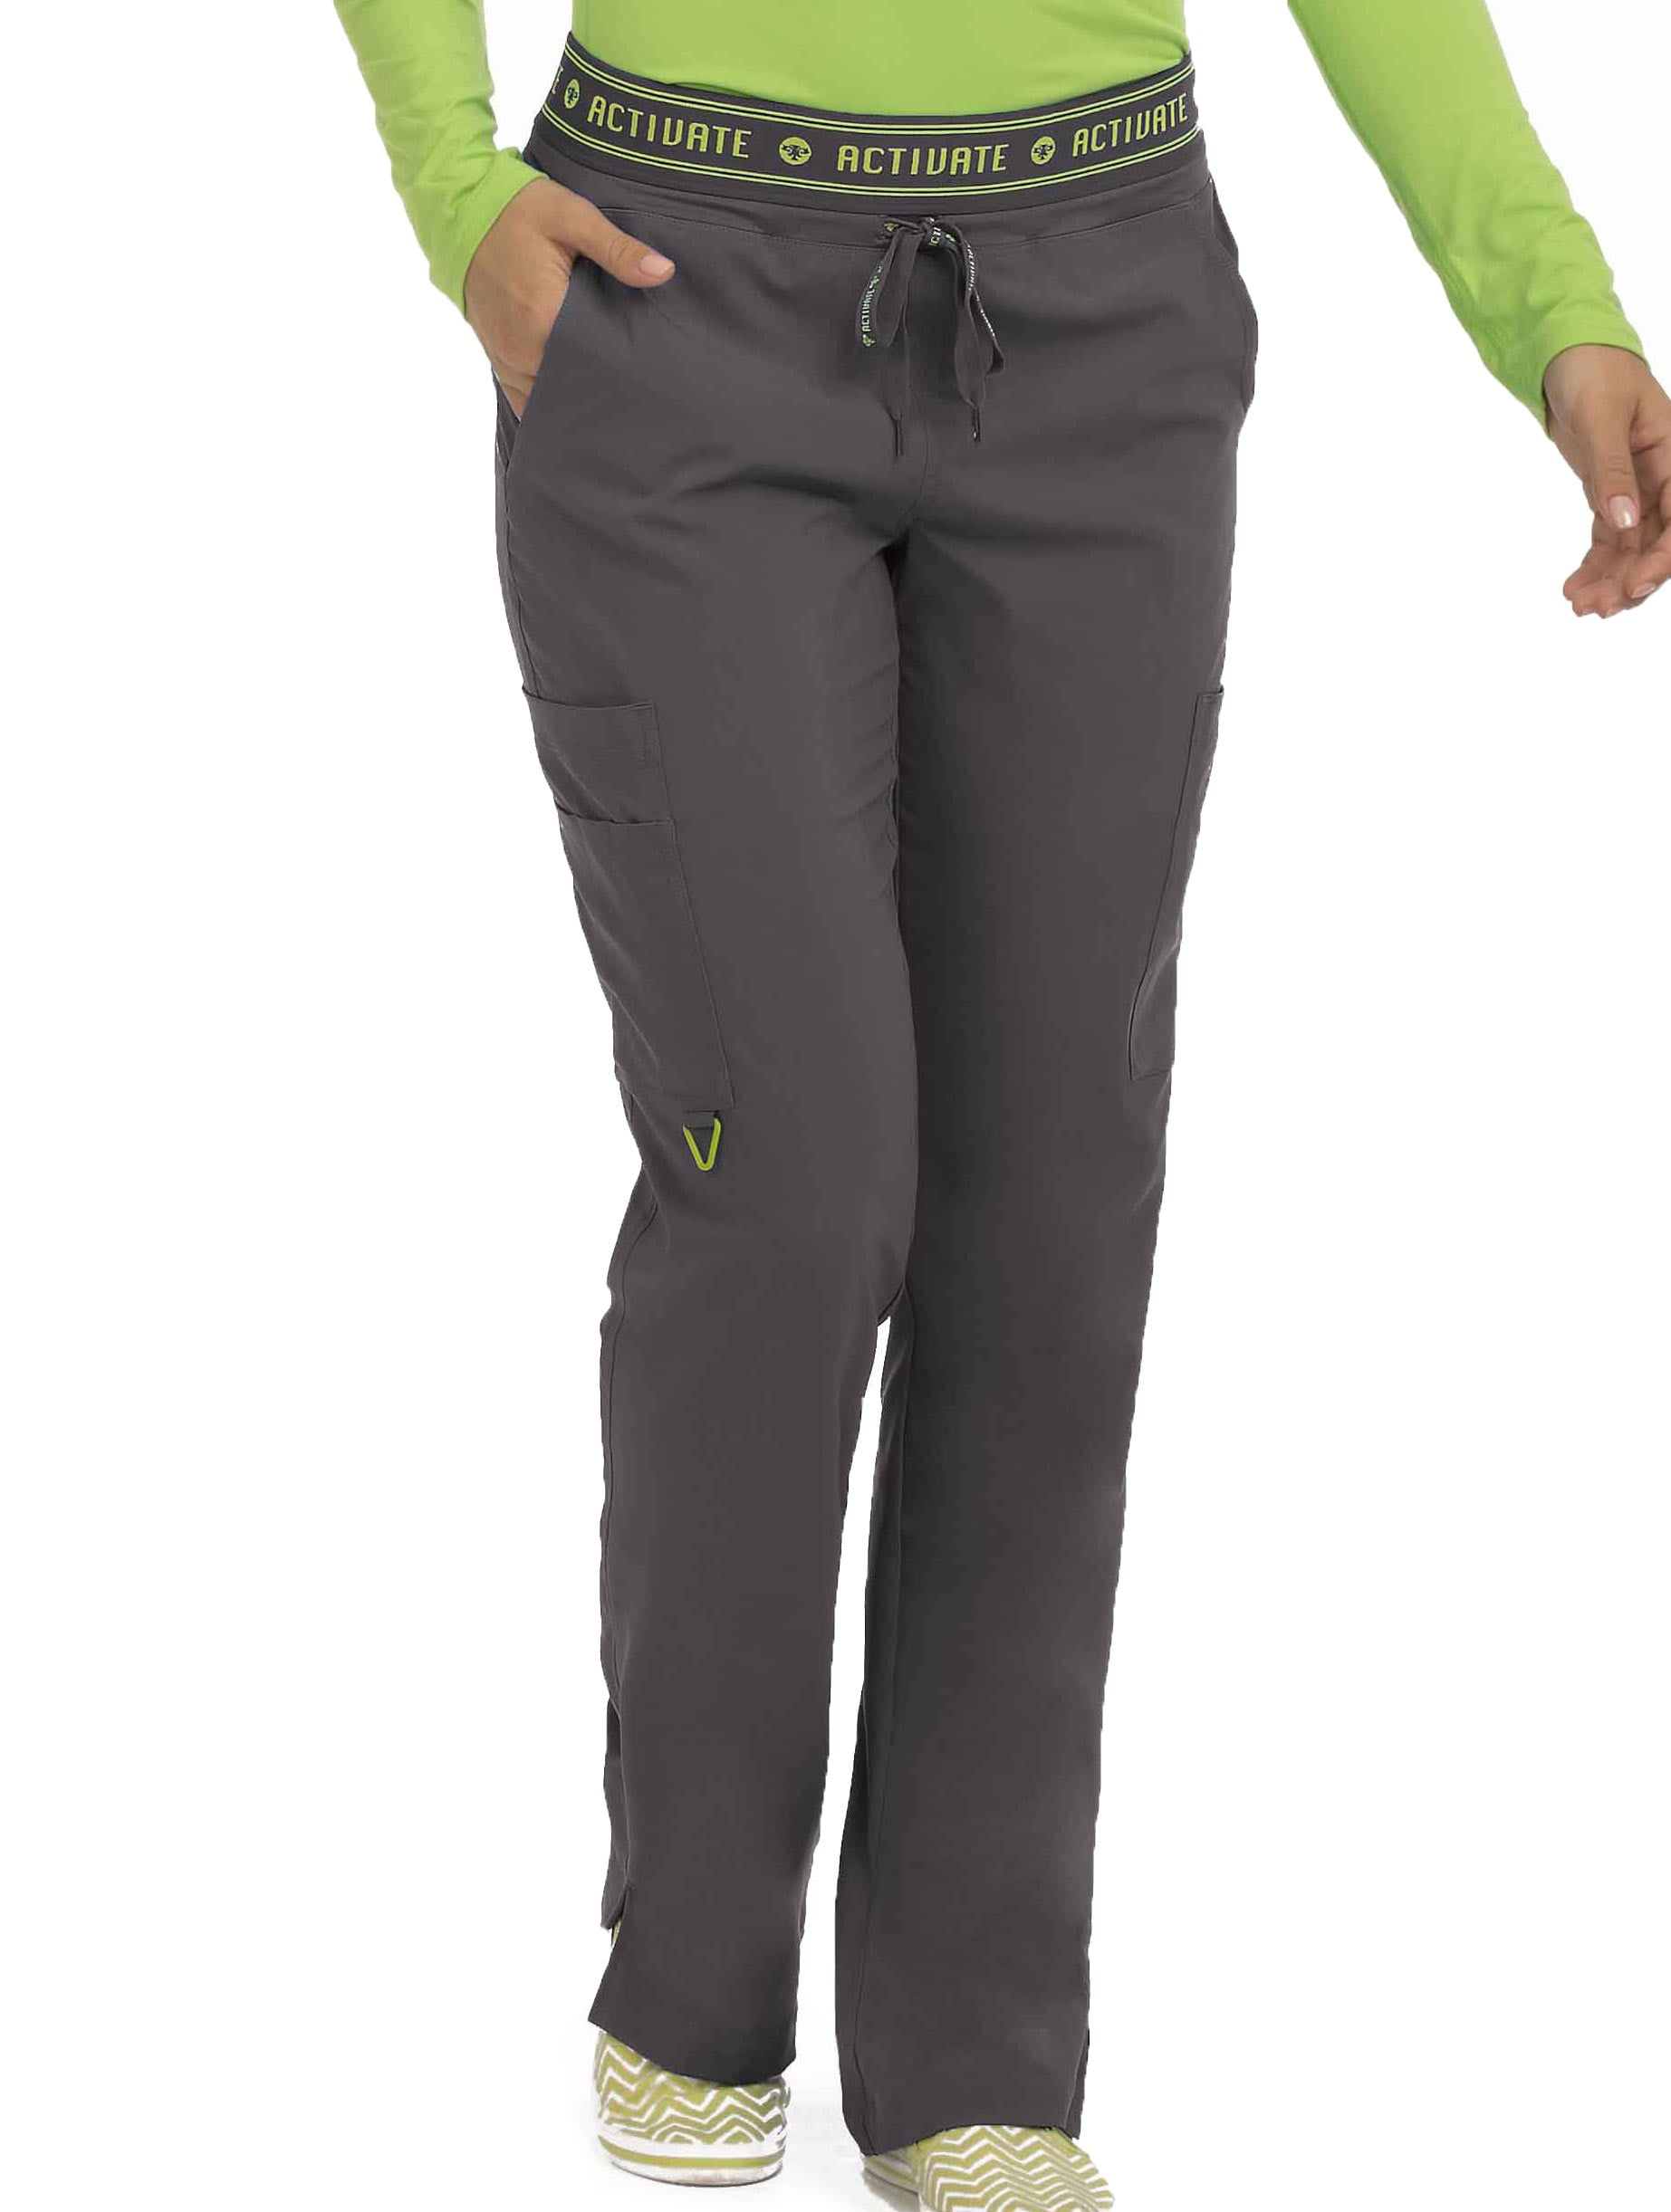 Med Couture Activate 8758 Flowy Scrub Pants, 51% OFF